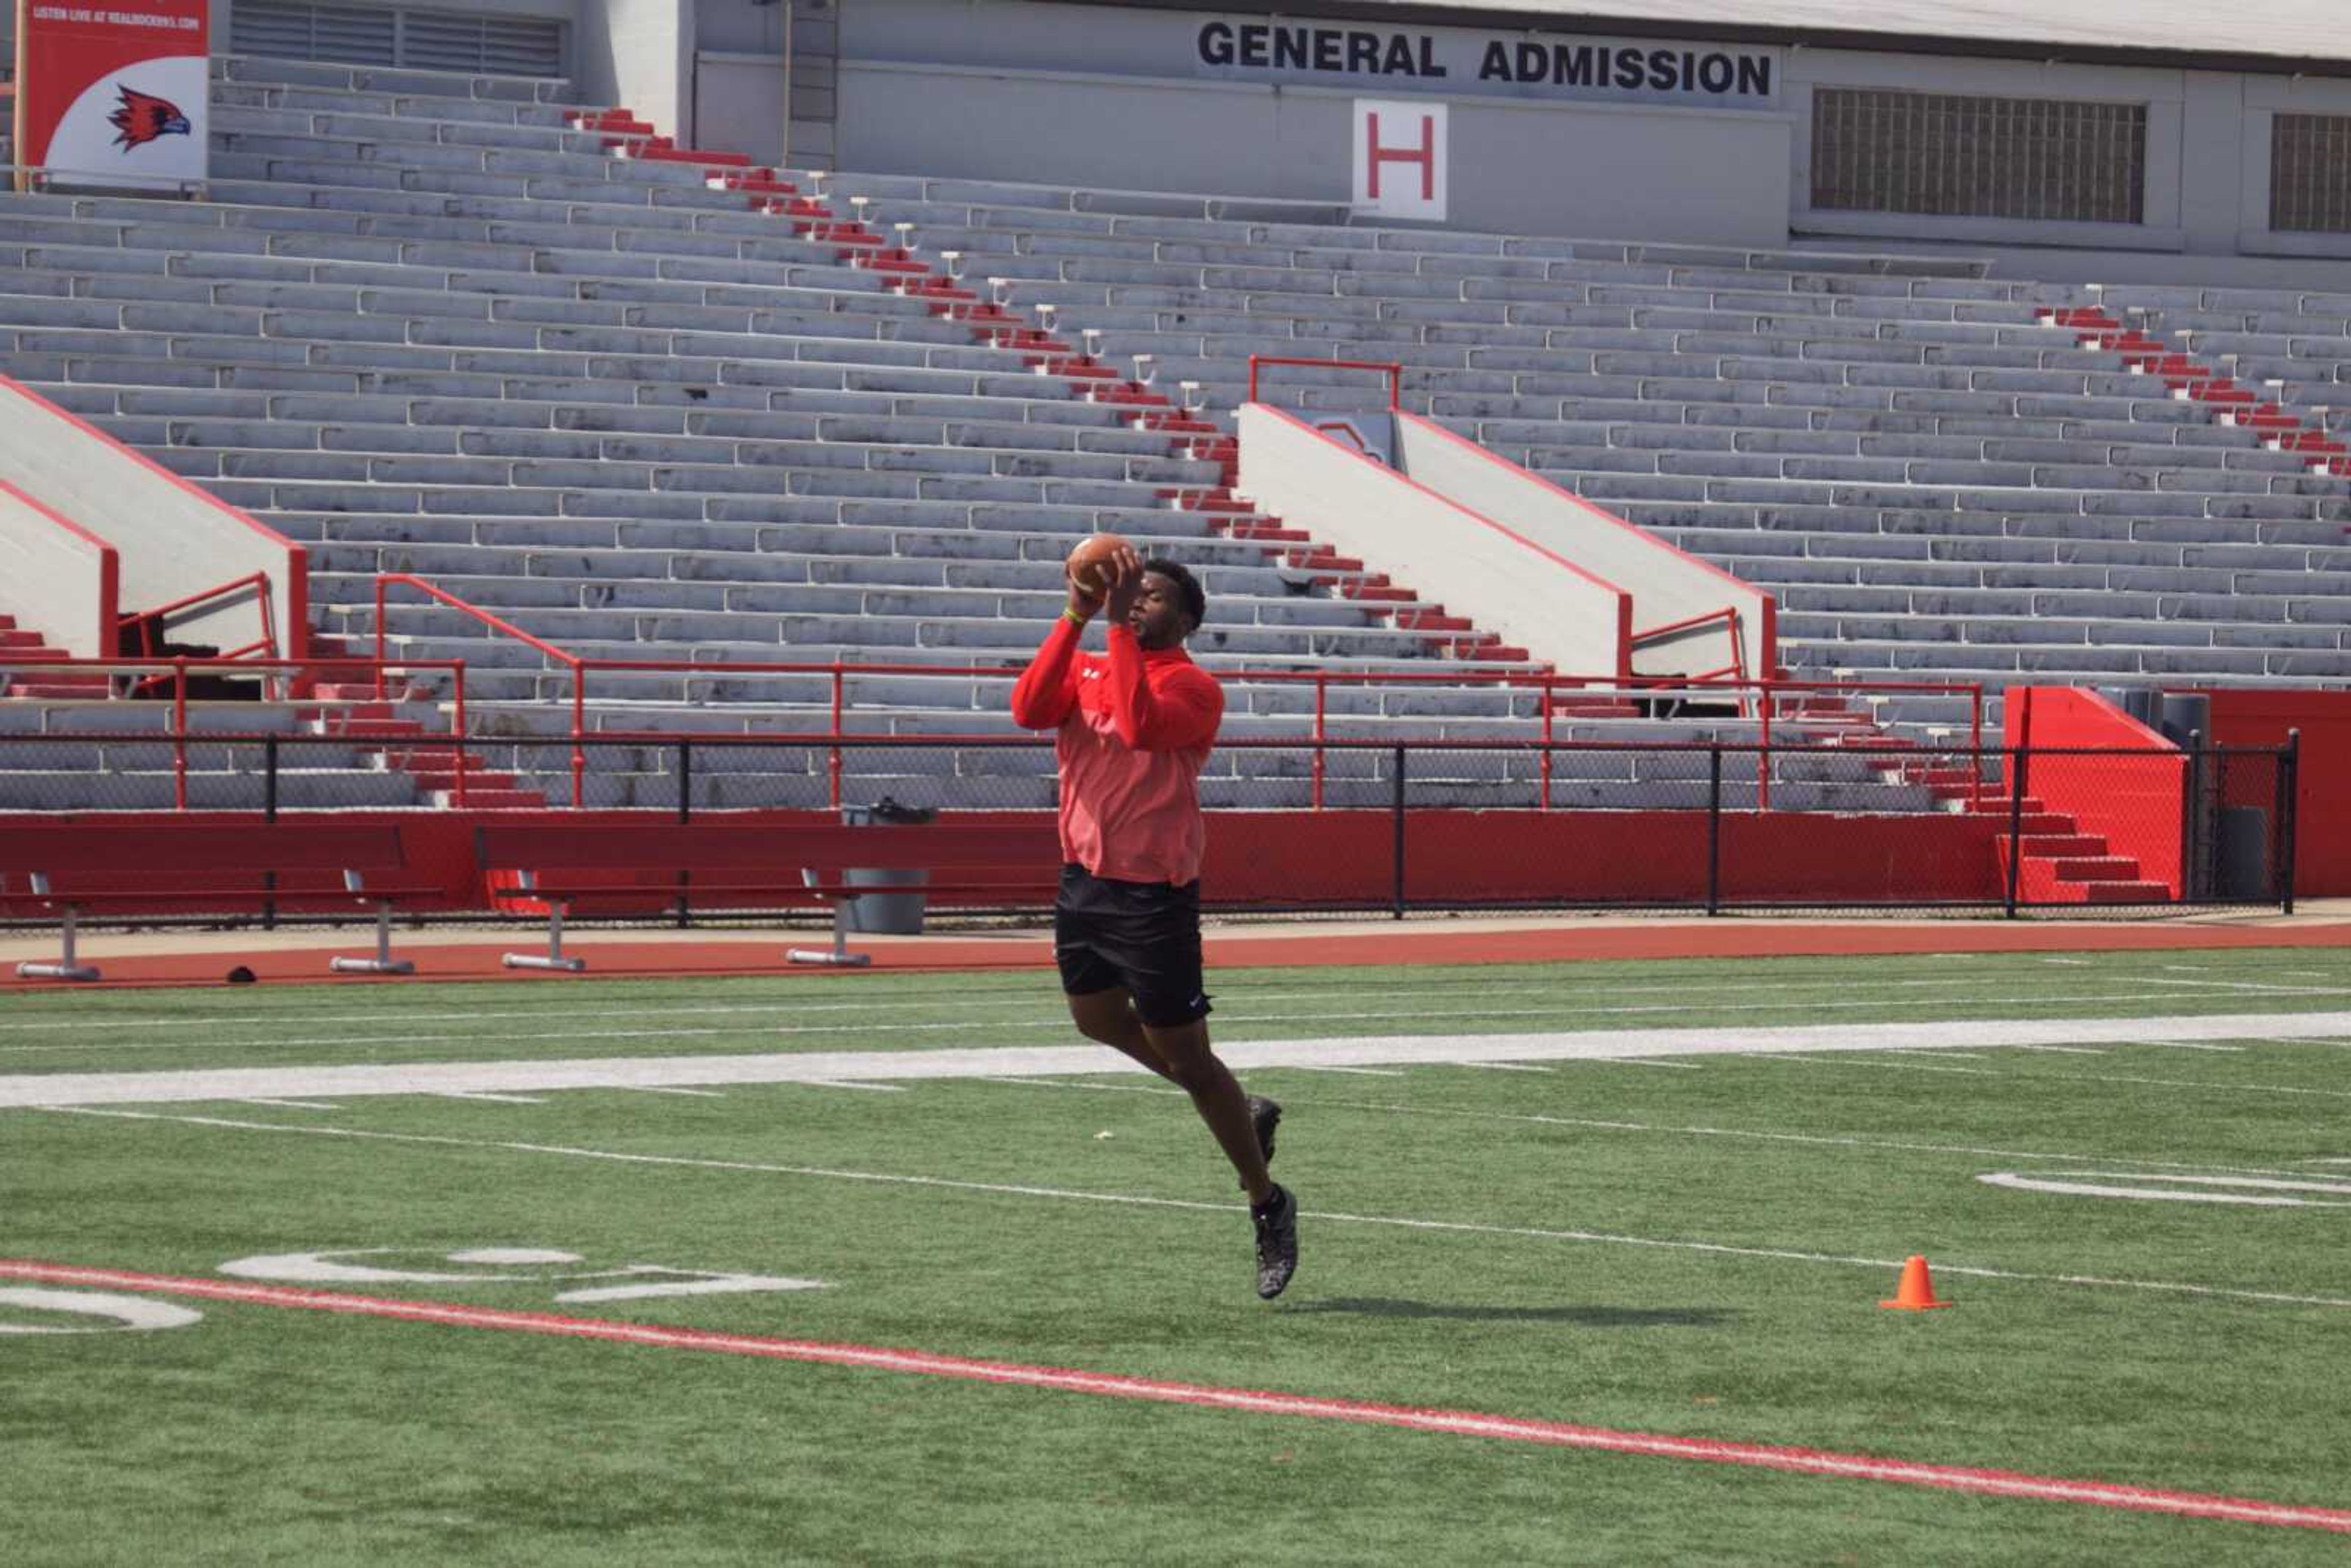 Senior linebacker Demarcus Rogers catches a pass during position drills at Southeast's pro day on March 26.